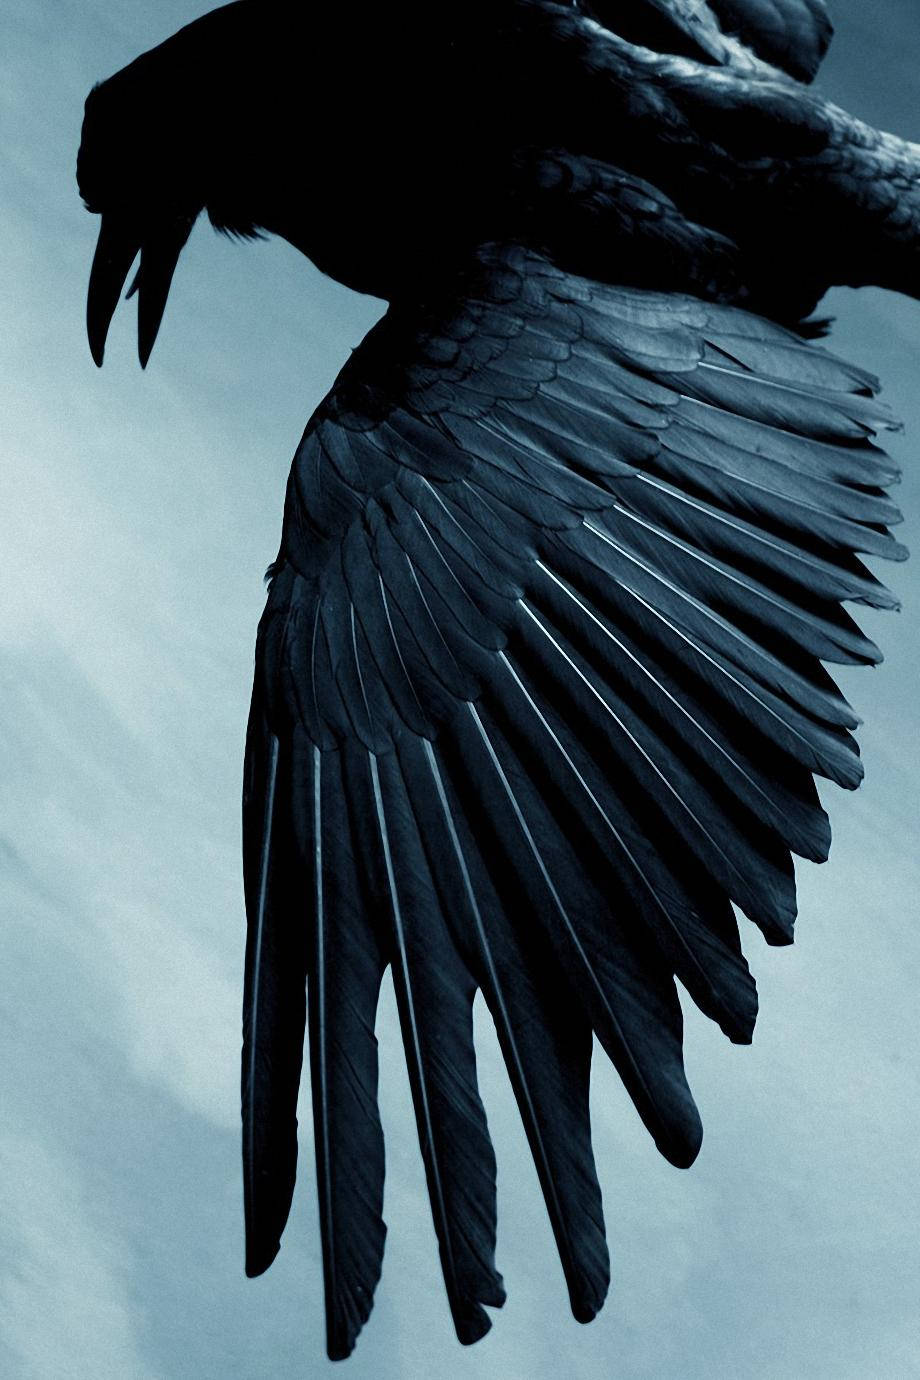 Pretty Raven Wing Mobile Hd Background